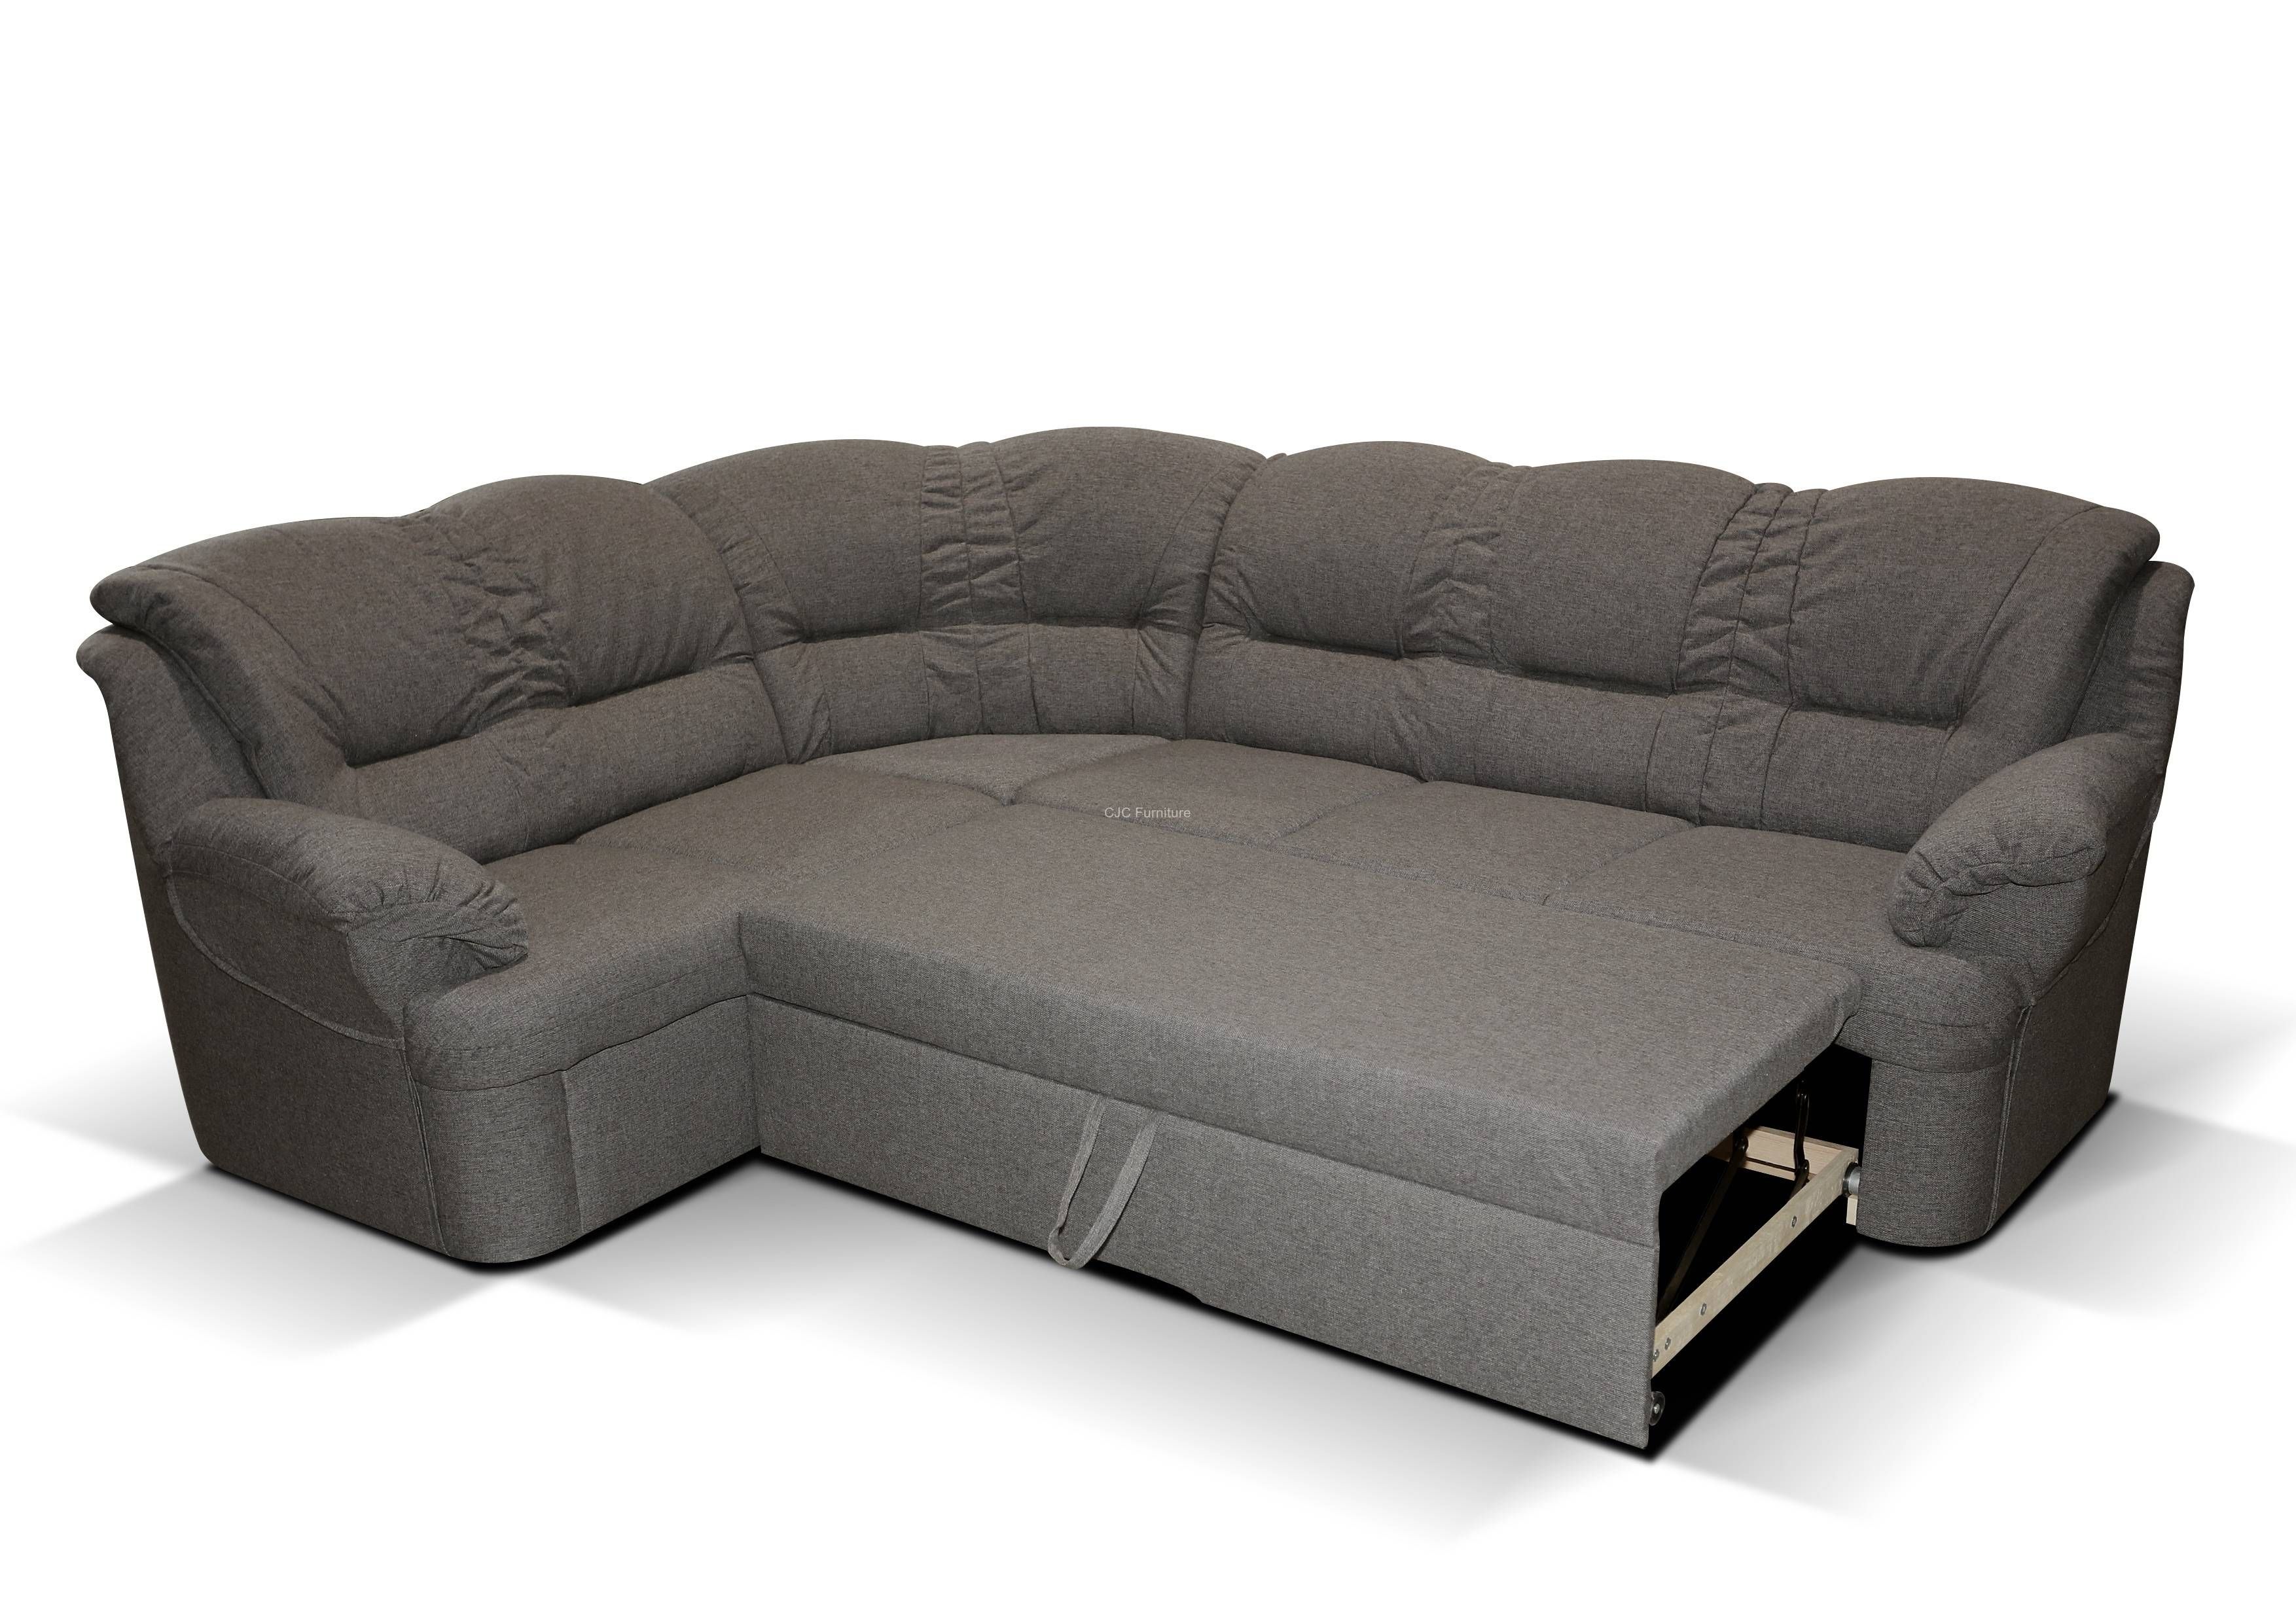 Sofas Center : 30 Staggering Discount Sofa Bed Photo Design Pertaining To Corner Sofa Bed Sale (View 23 of 30)